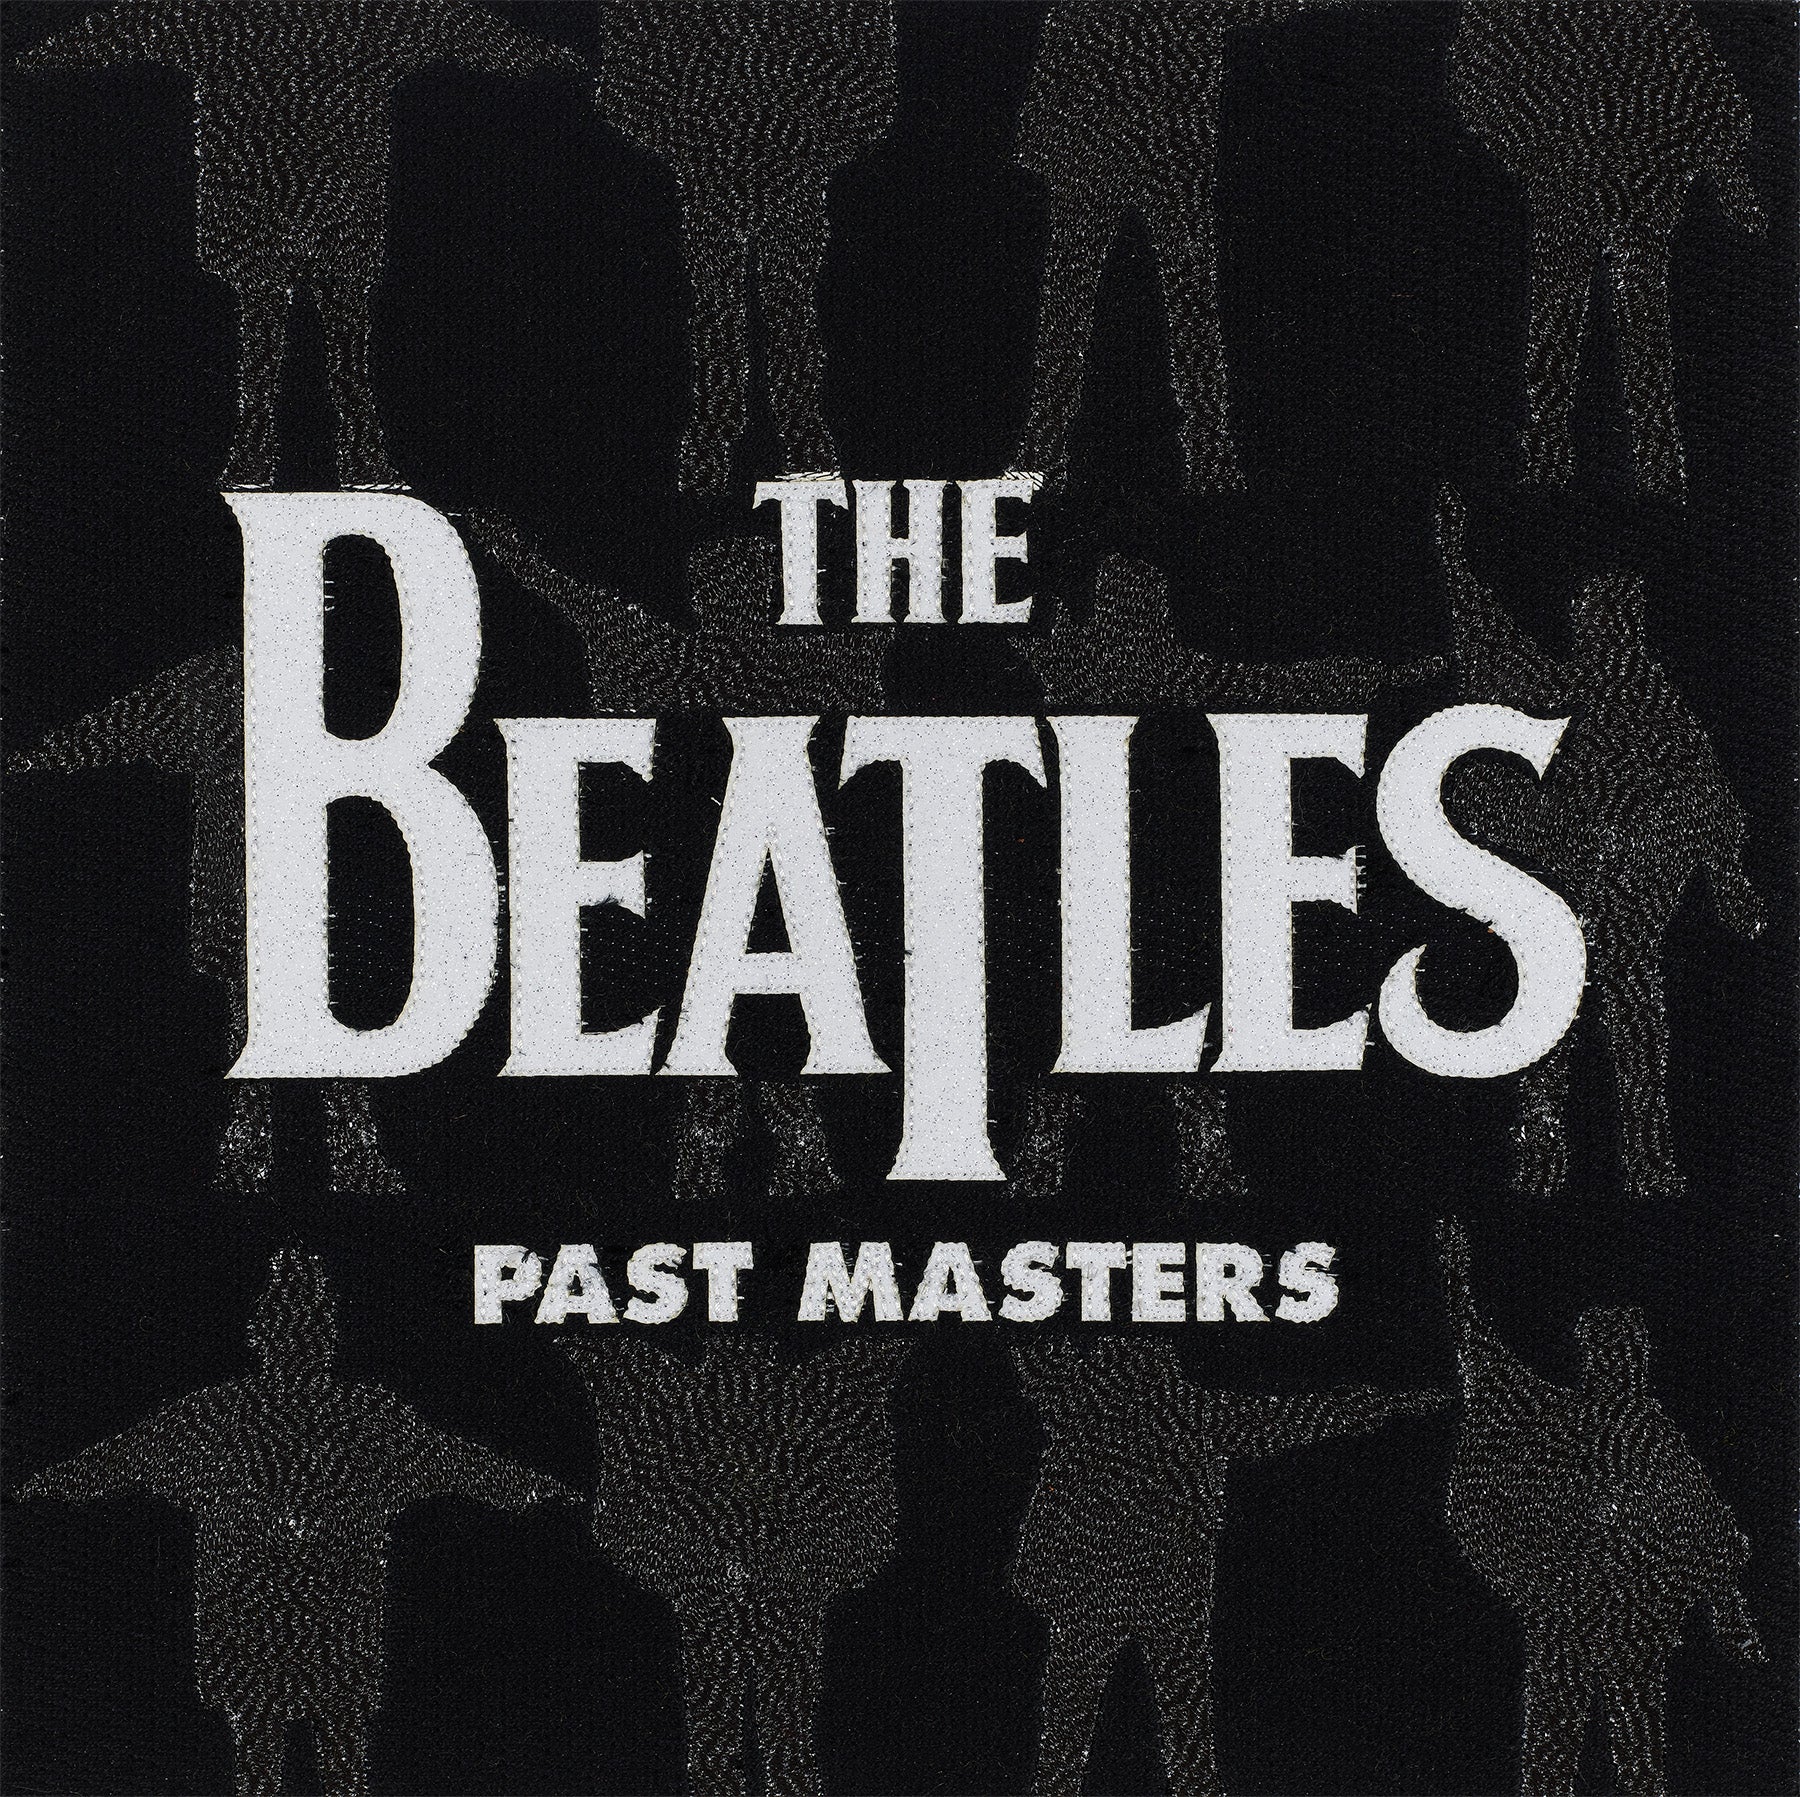 Past Masters, The Beatles - 3 by Stephen Wilson (12x12x2